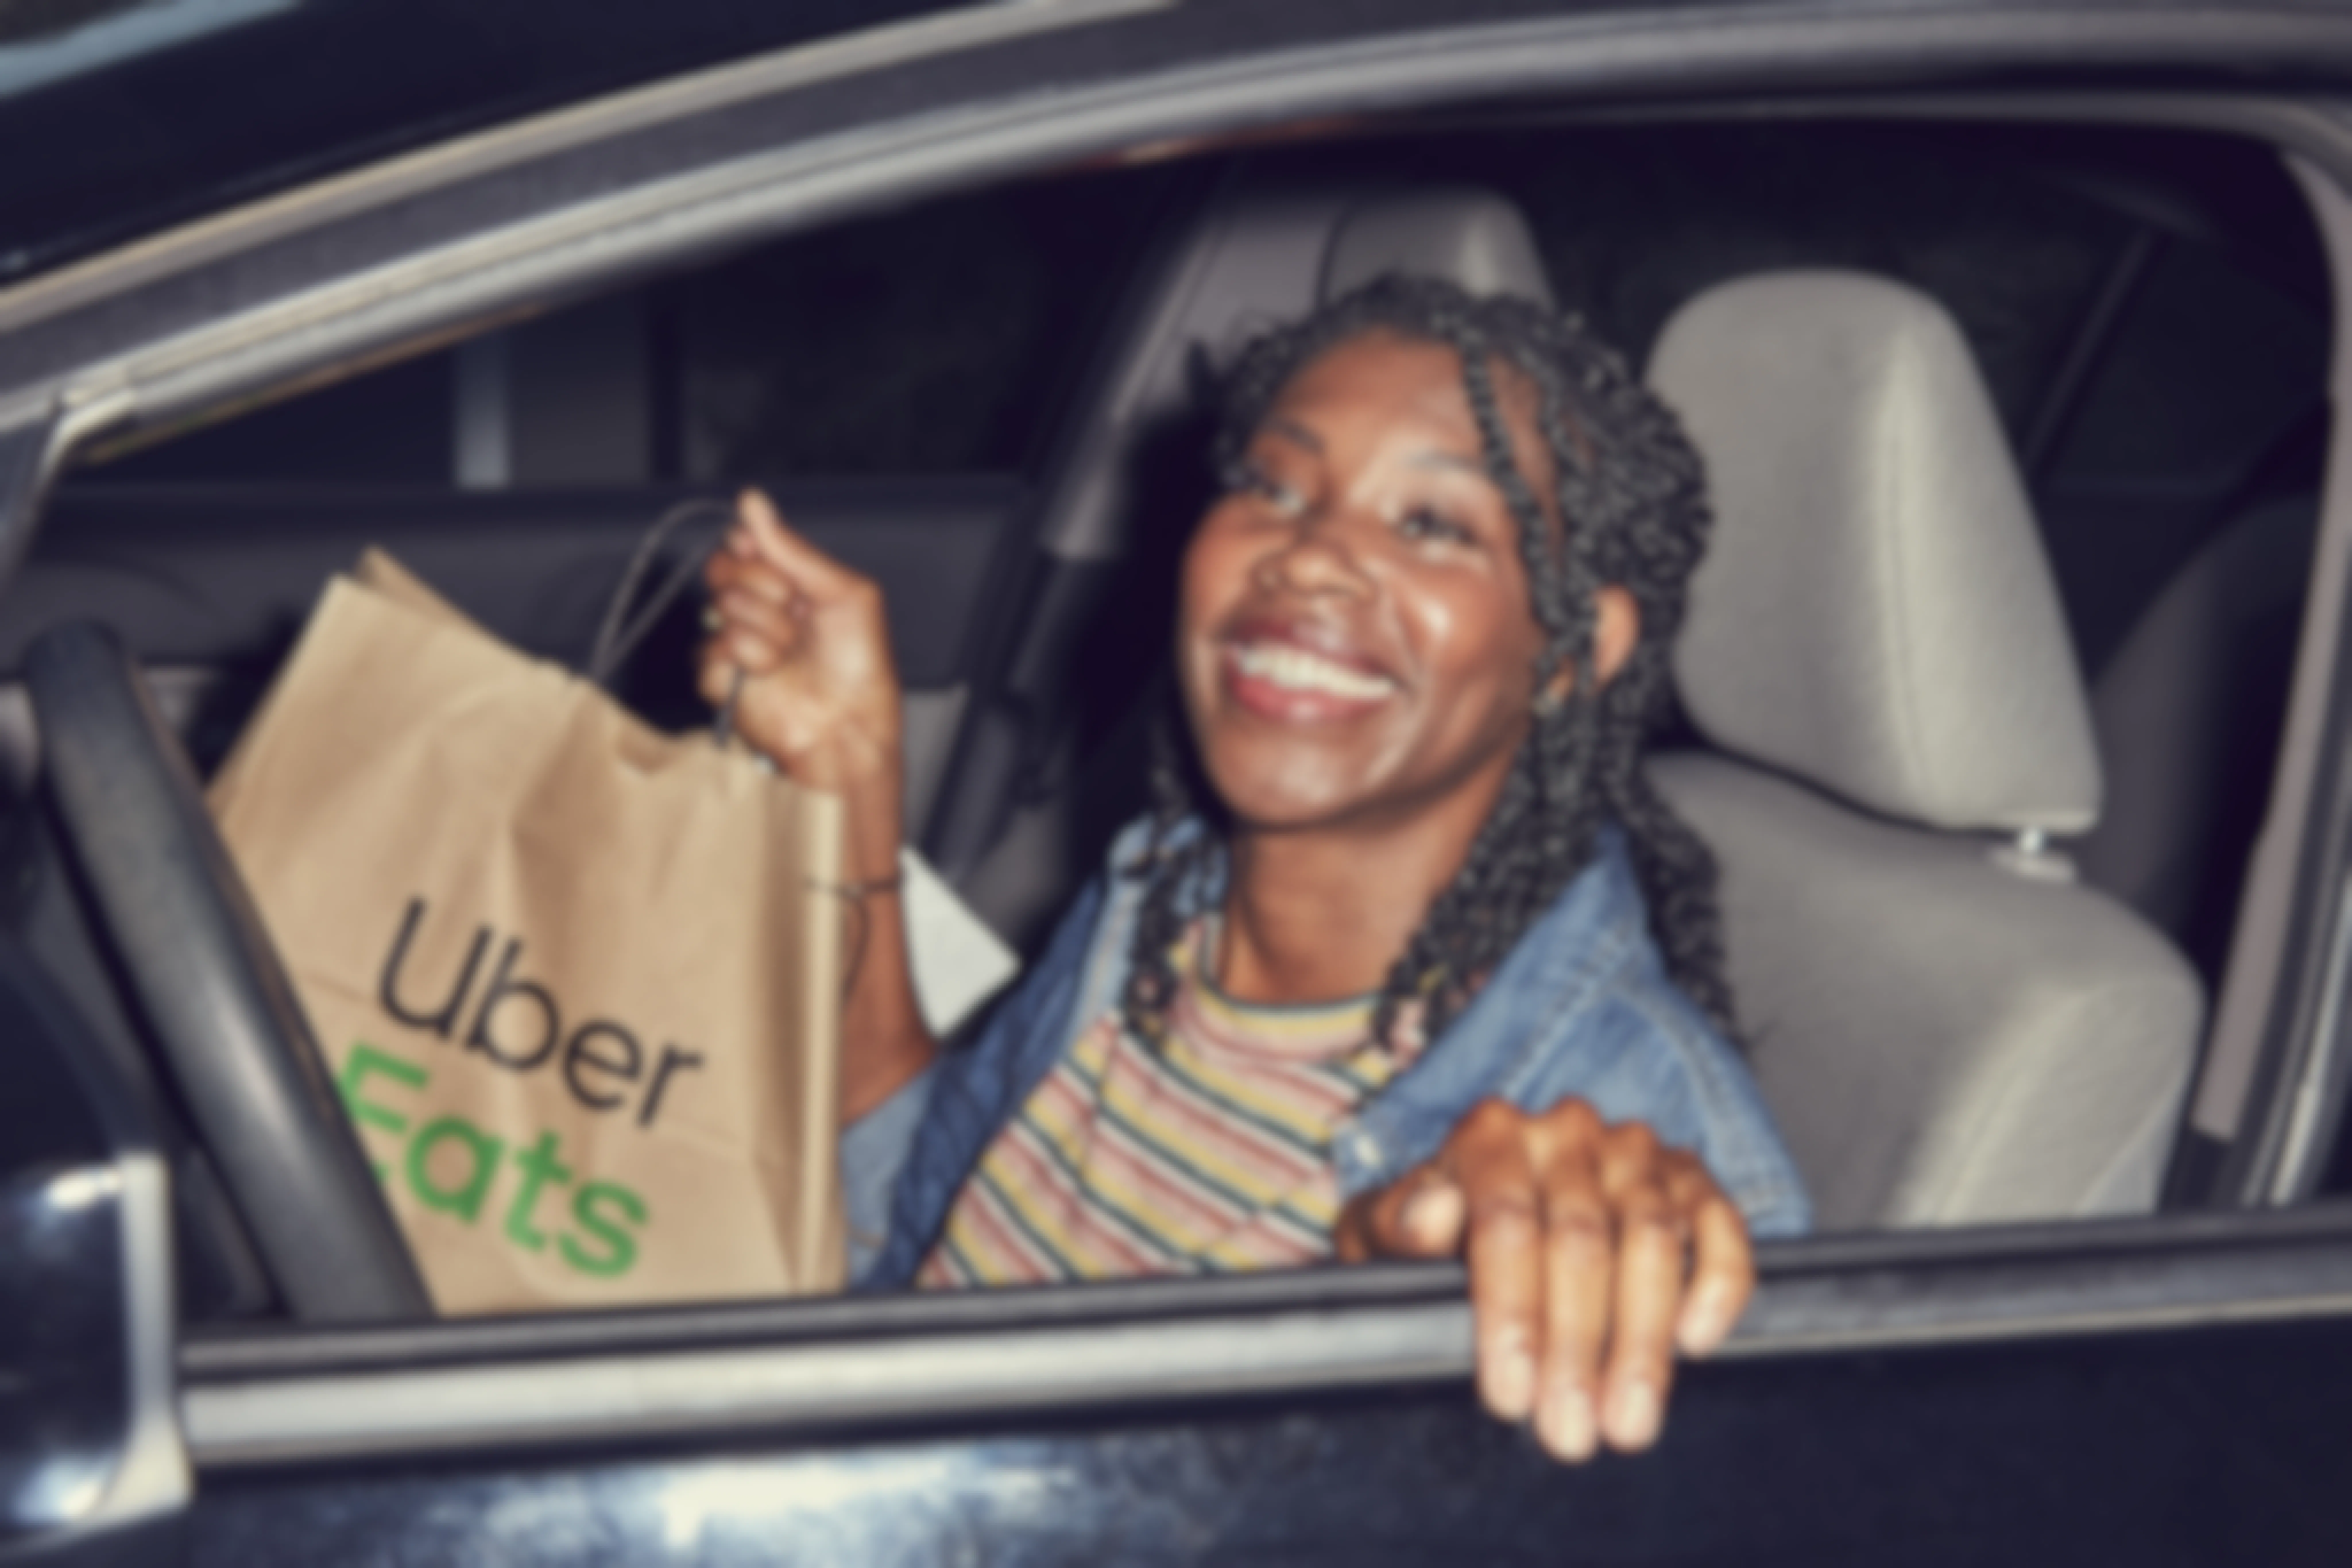 A woman opening the door to her car to exit, holding an Uber eats bag in her hand.